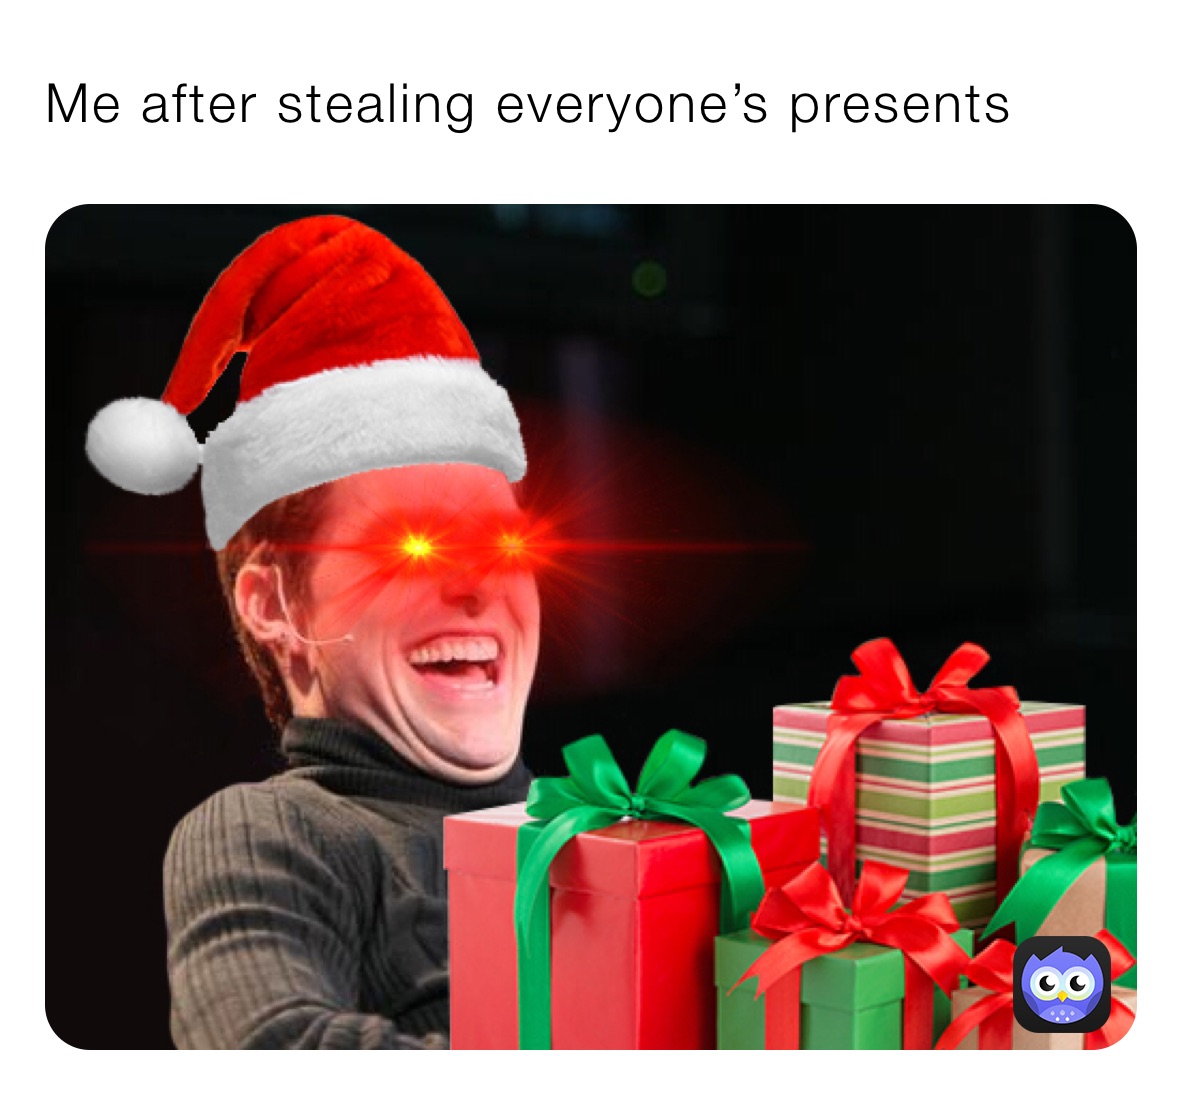 Me after stealing everyone’s presents